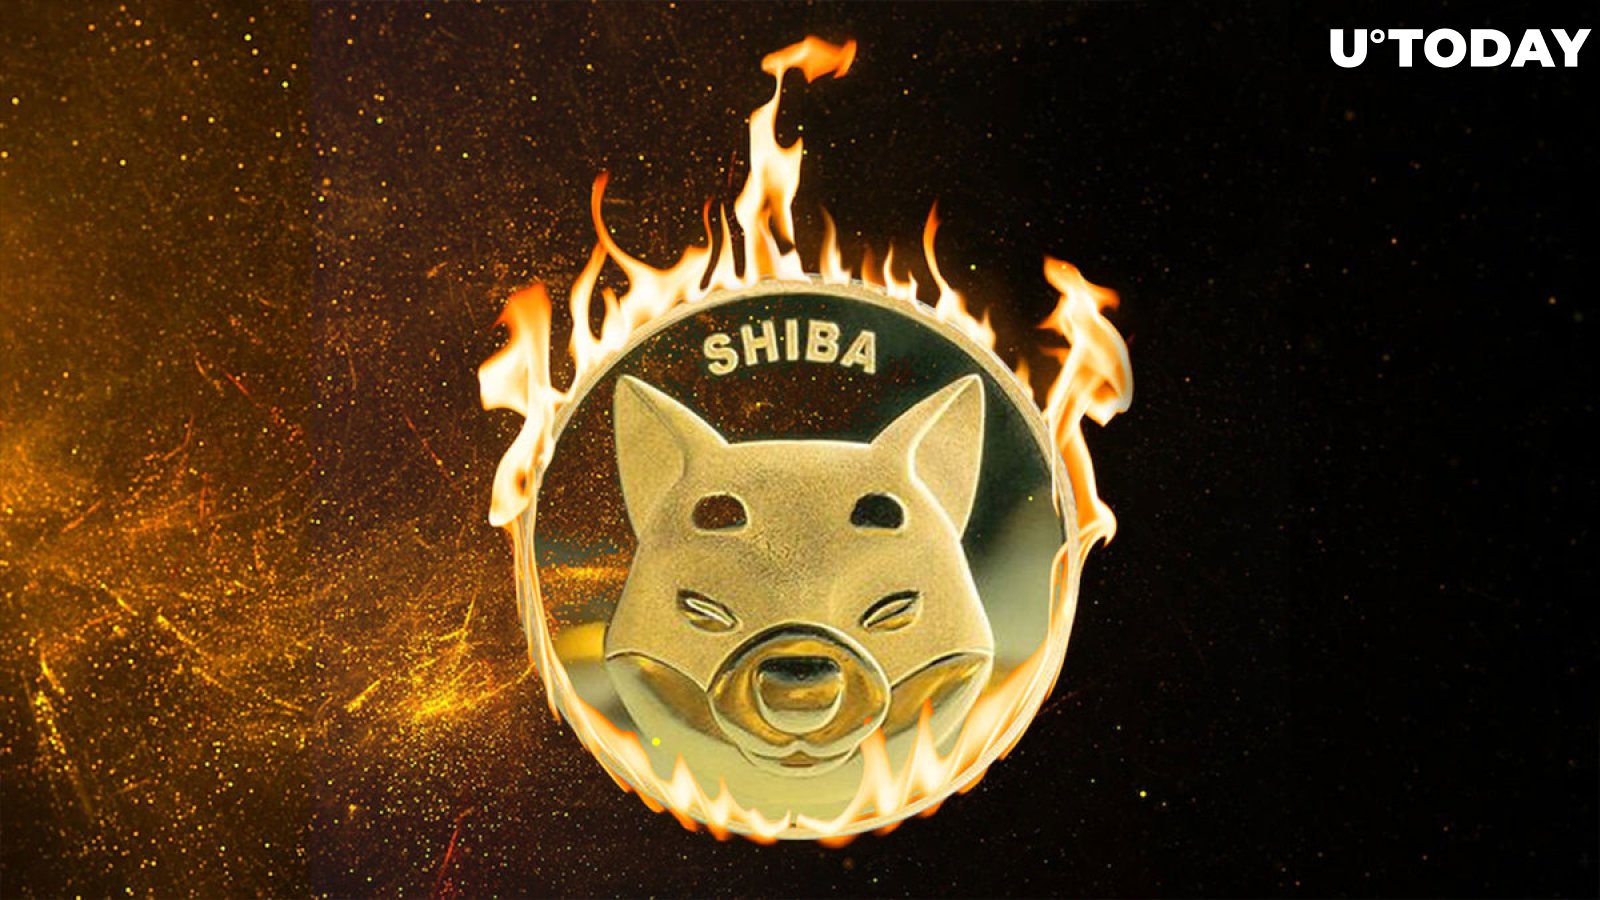 More Than 8 Million Shiba Inu Tokens Burnt as Meme Coin Takes Breather, Here Are Next Moves to Watch